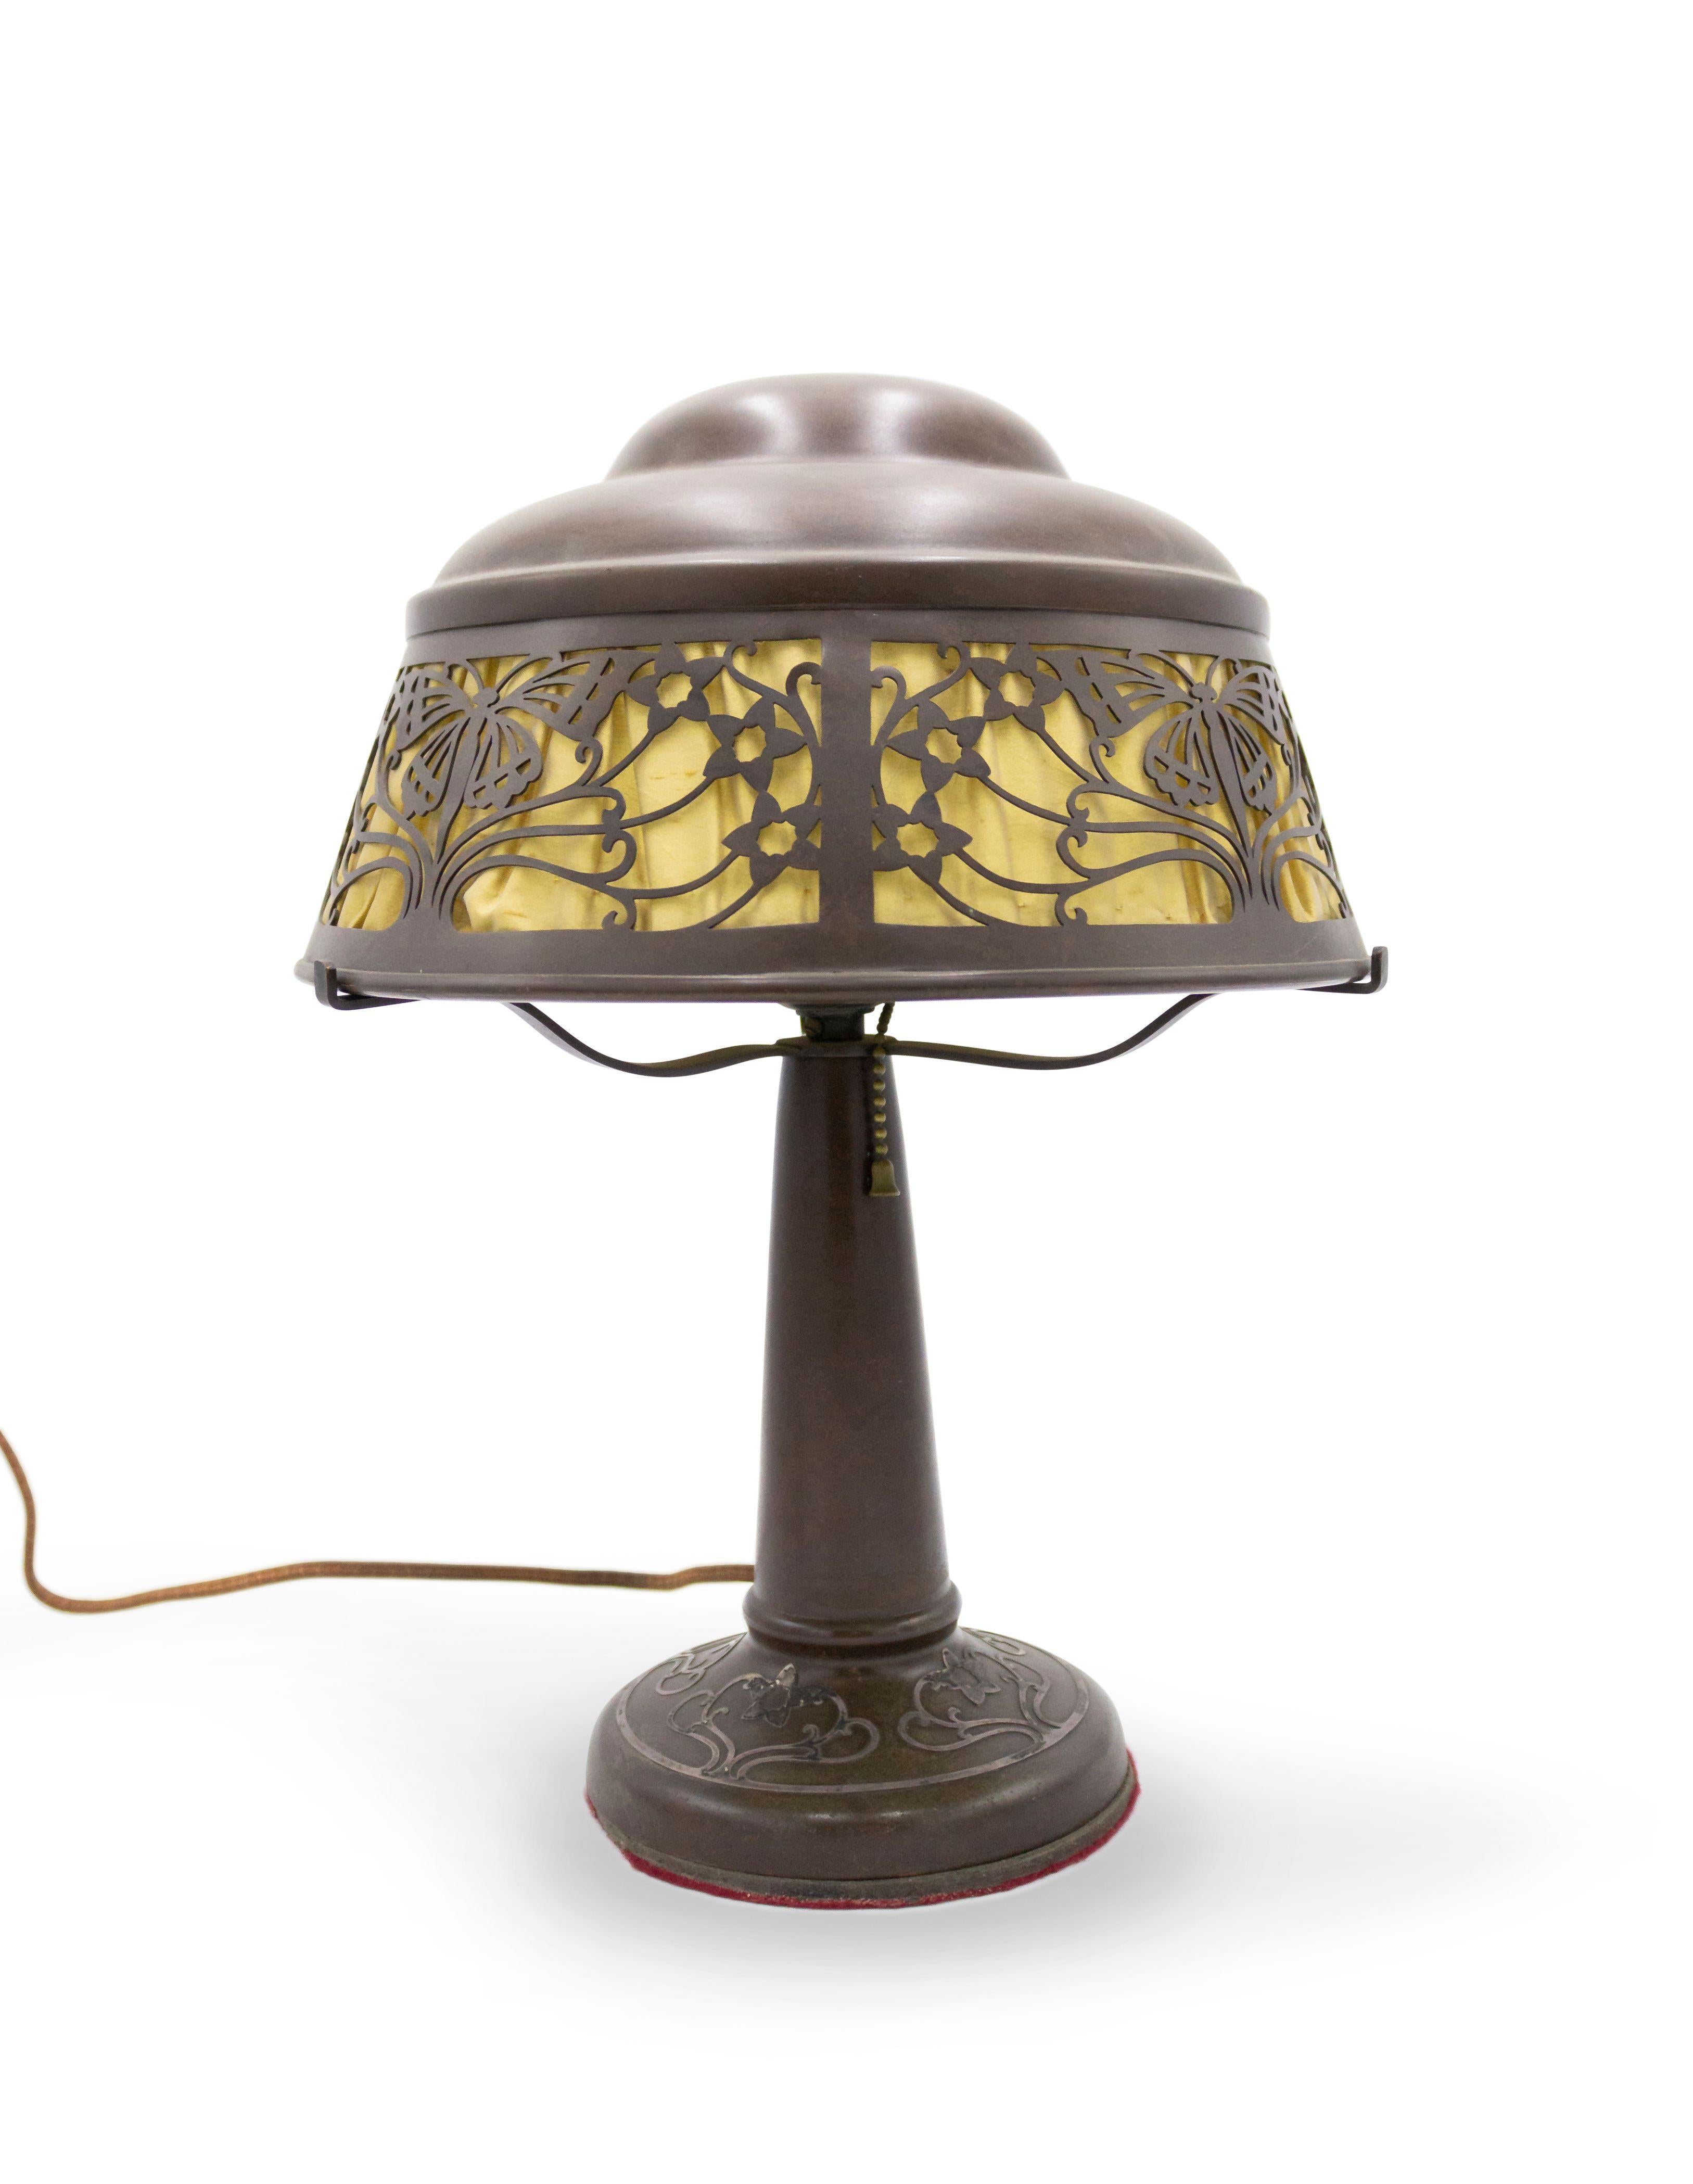 American Mission bronze patinated table lamp with silver deposit floral design base and filigree butterfly motif shade (HEINTZ ART METAL).
